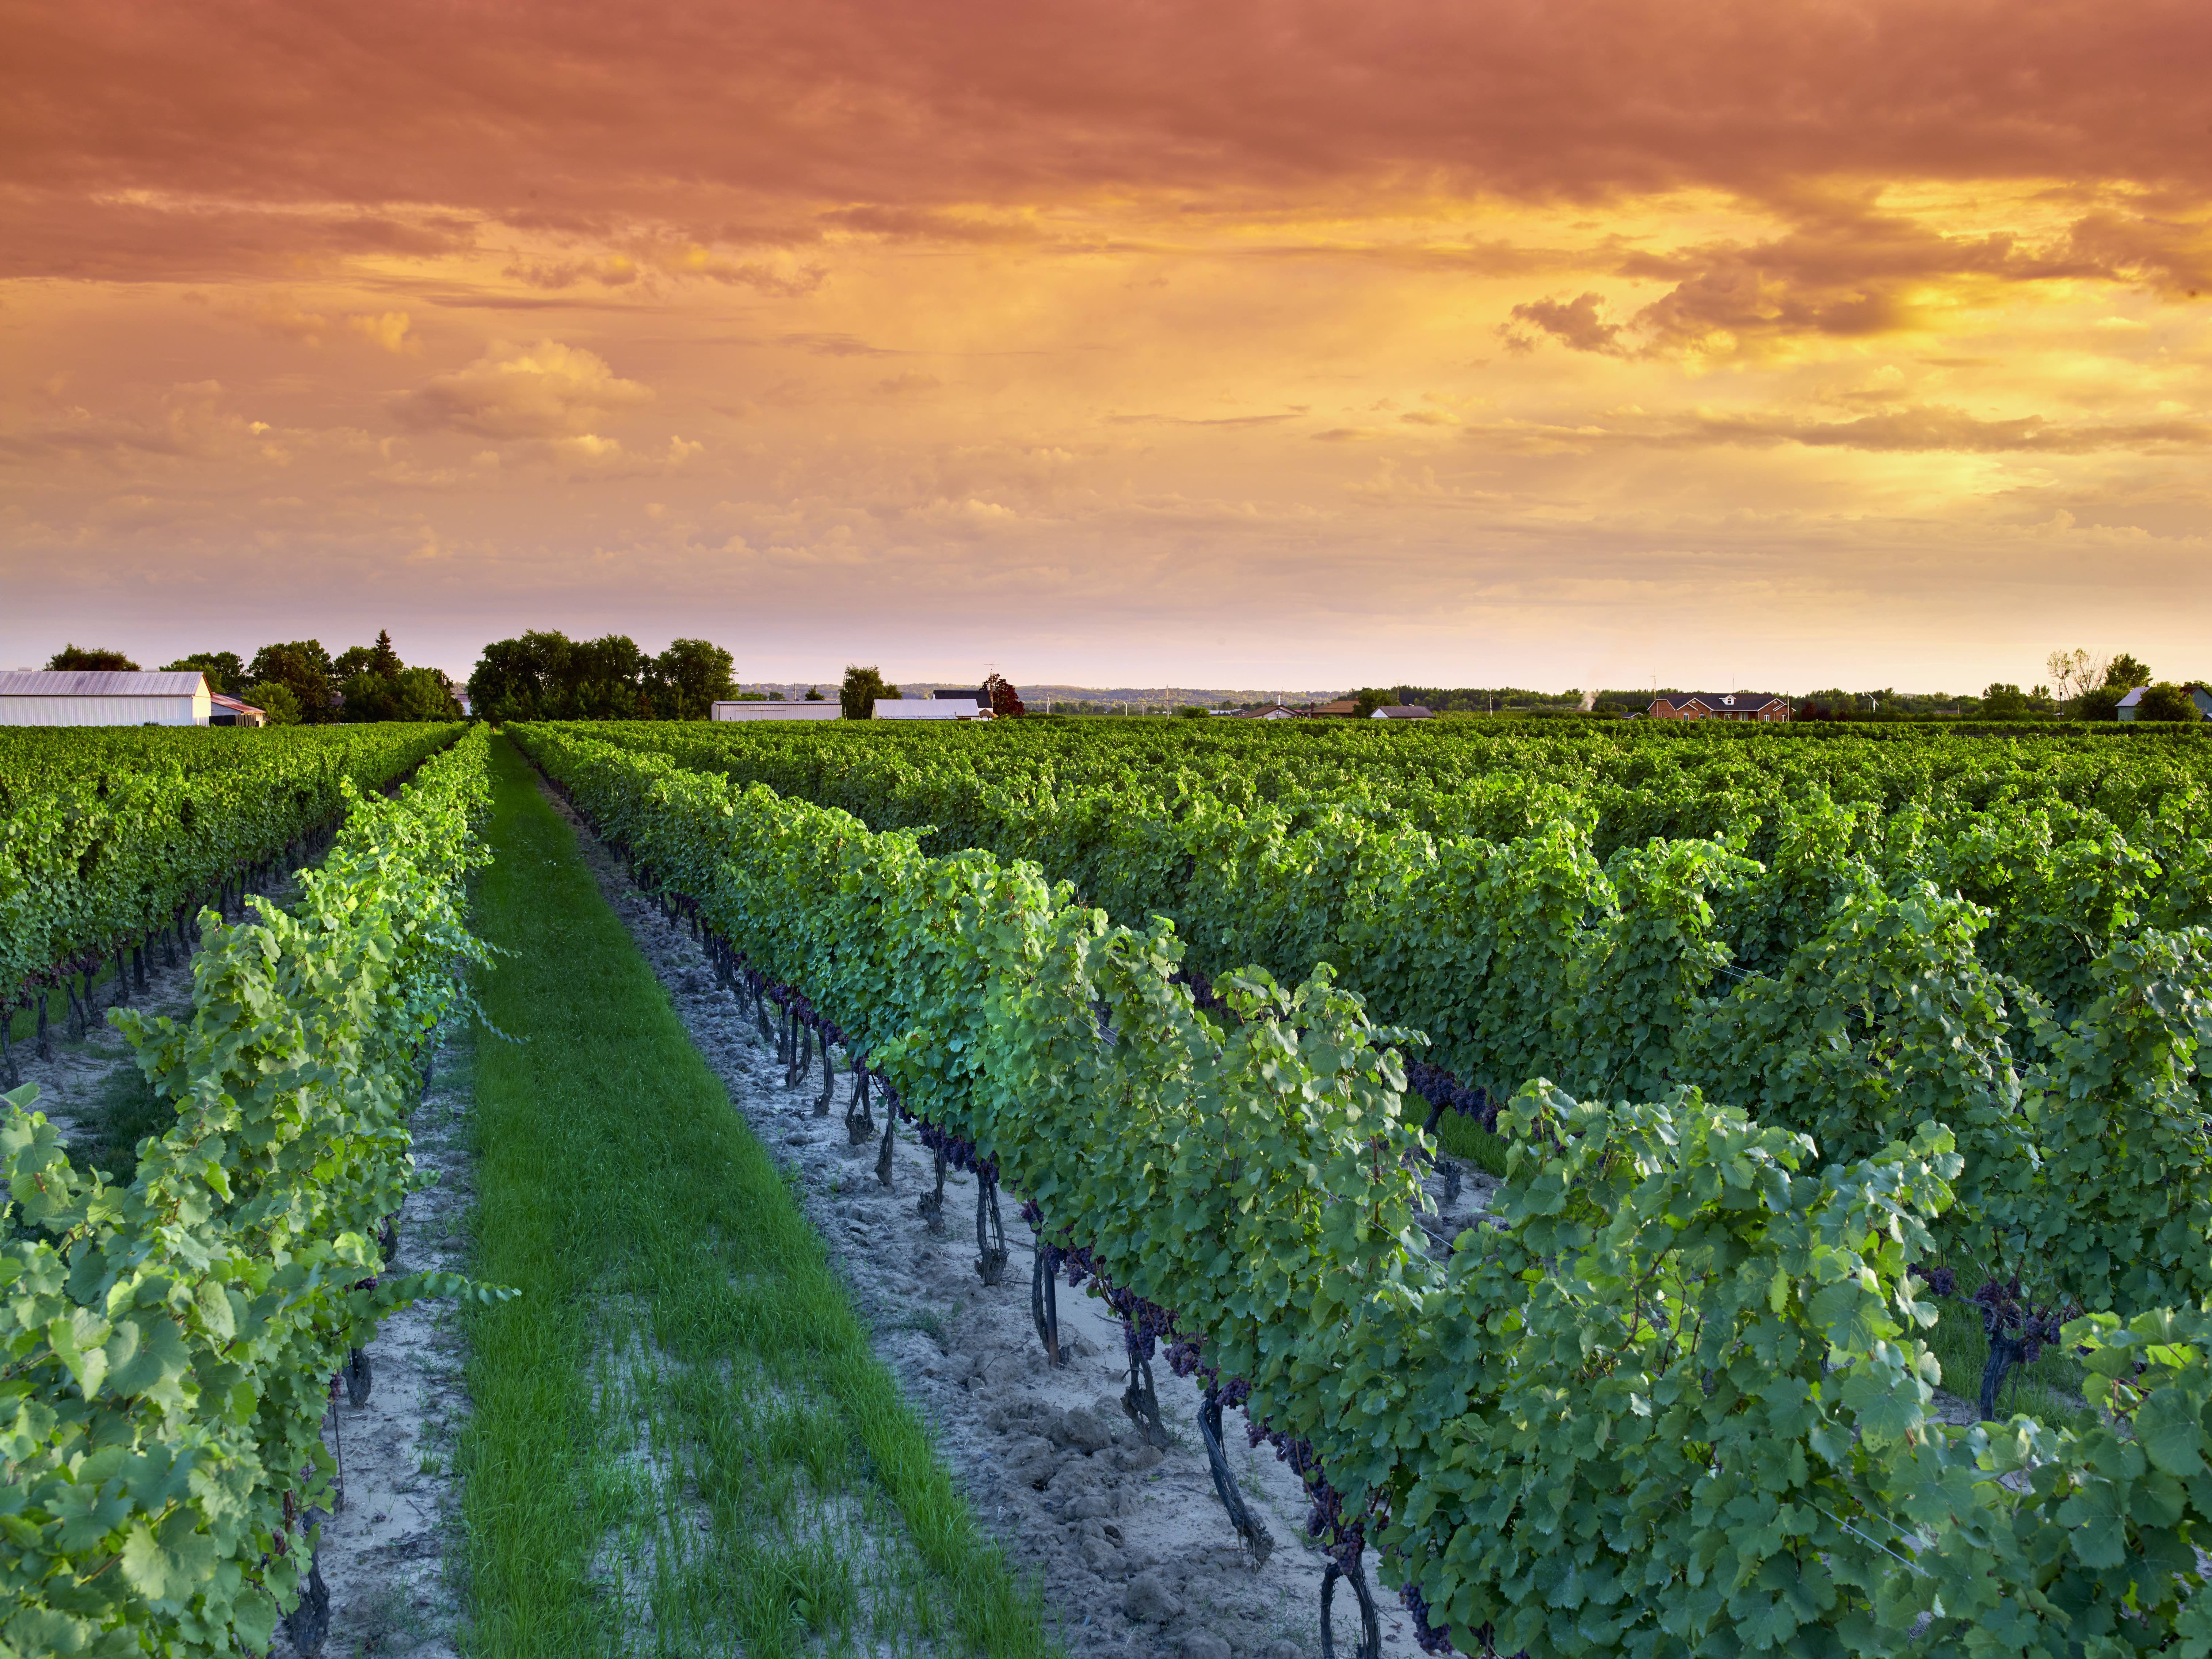 e. Ontario’s vineyards produce about two-thirds of the wine grapes in Canada, with the Niagara Peninsula contributing about 90 per cent of this. Photo: Wine Marketing Association of Ontario 